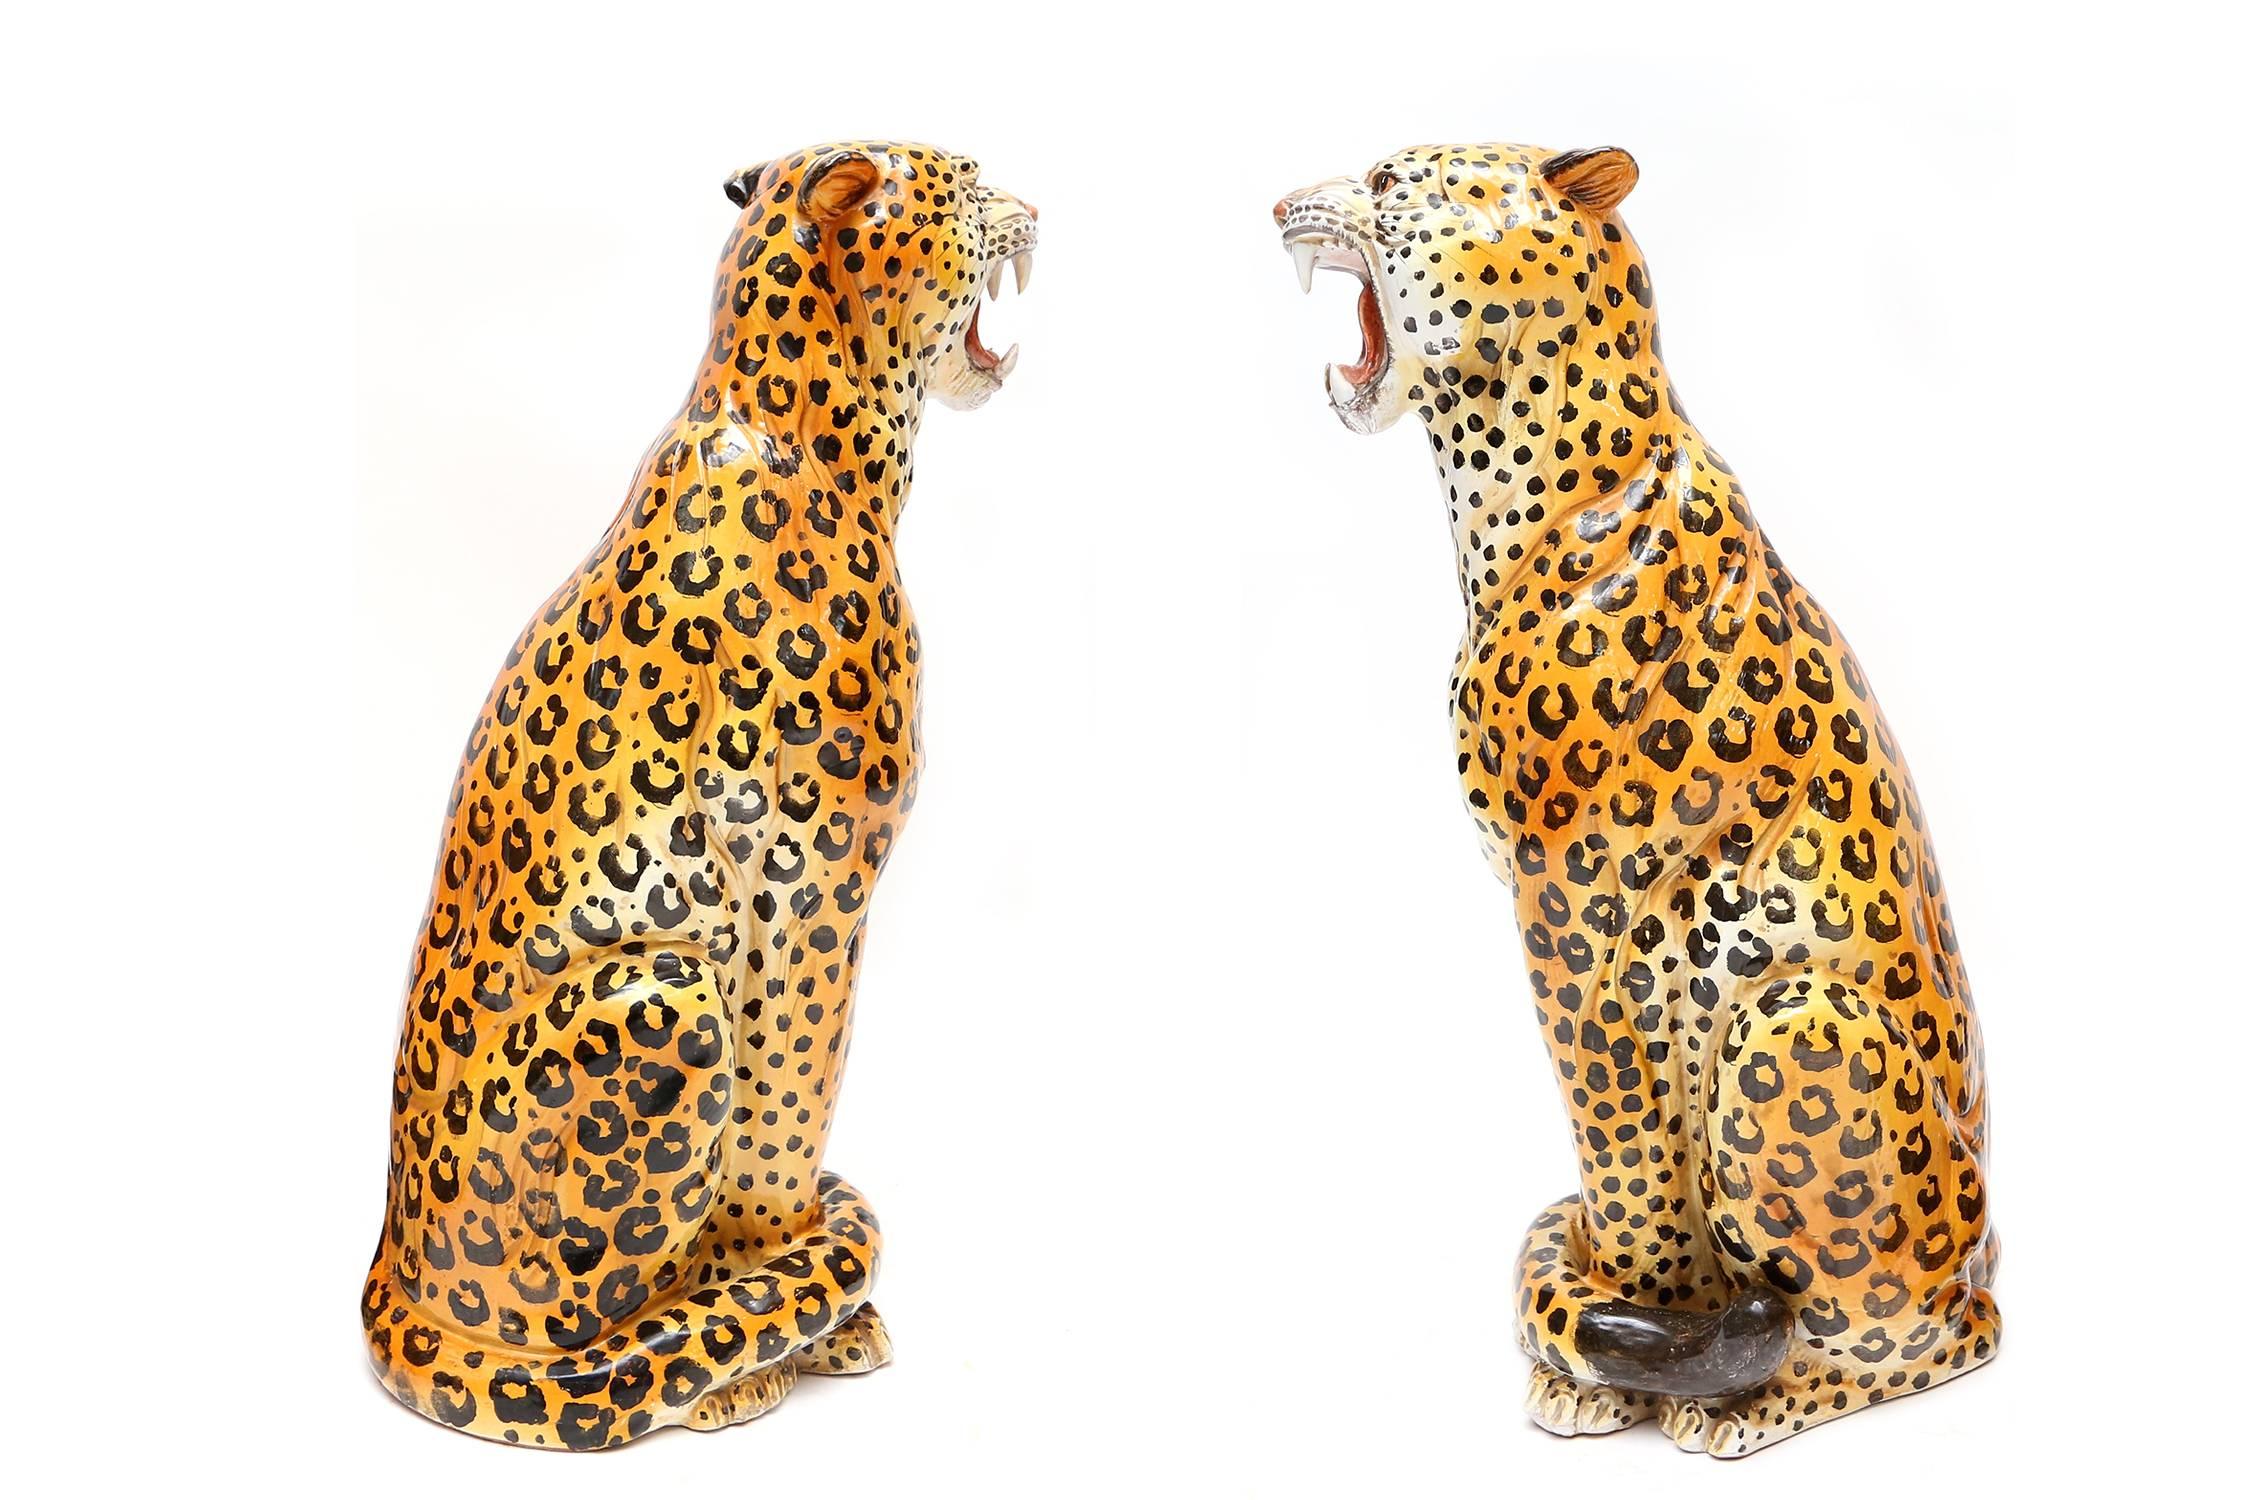 Pair of hand-painted polychrome ceramic leopard sculptures.
They differ slightly from each other.
Perfect condition,
Italy, circa 1950.
Measures: H 85 cm, D 40 cm, W 32 cm x 2.